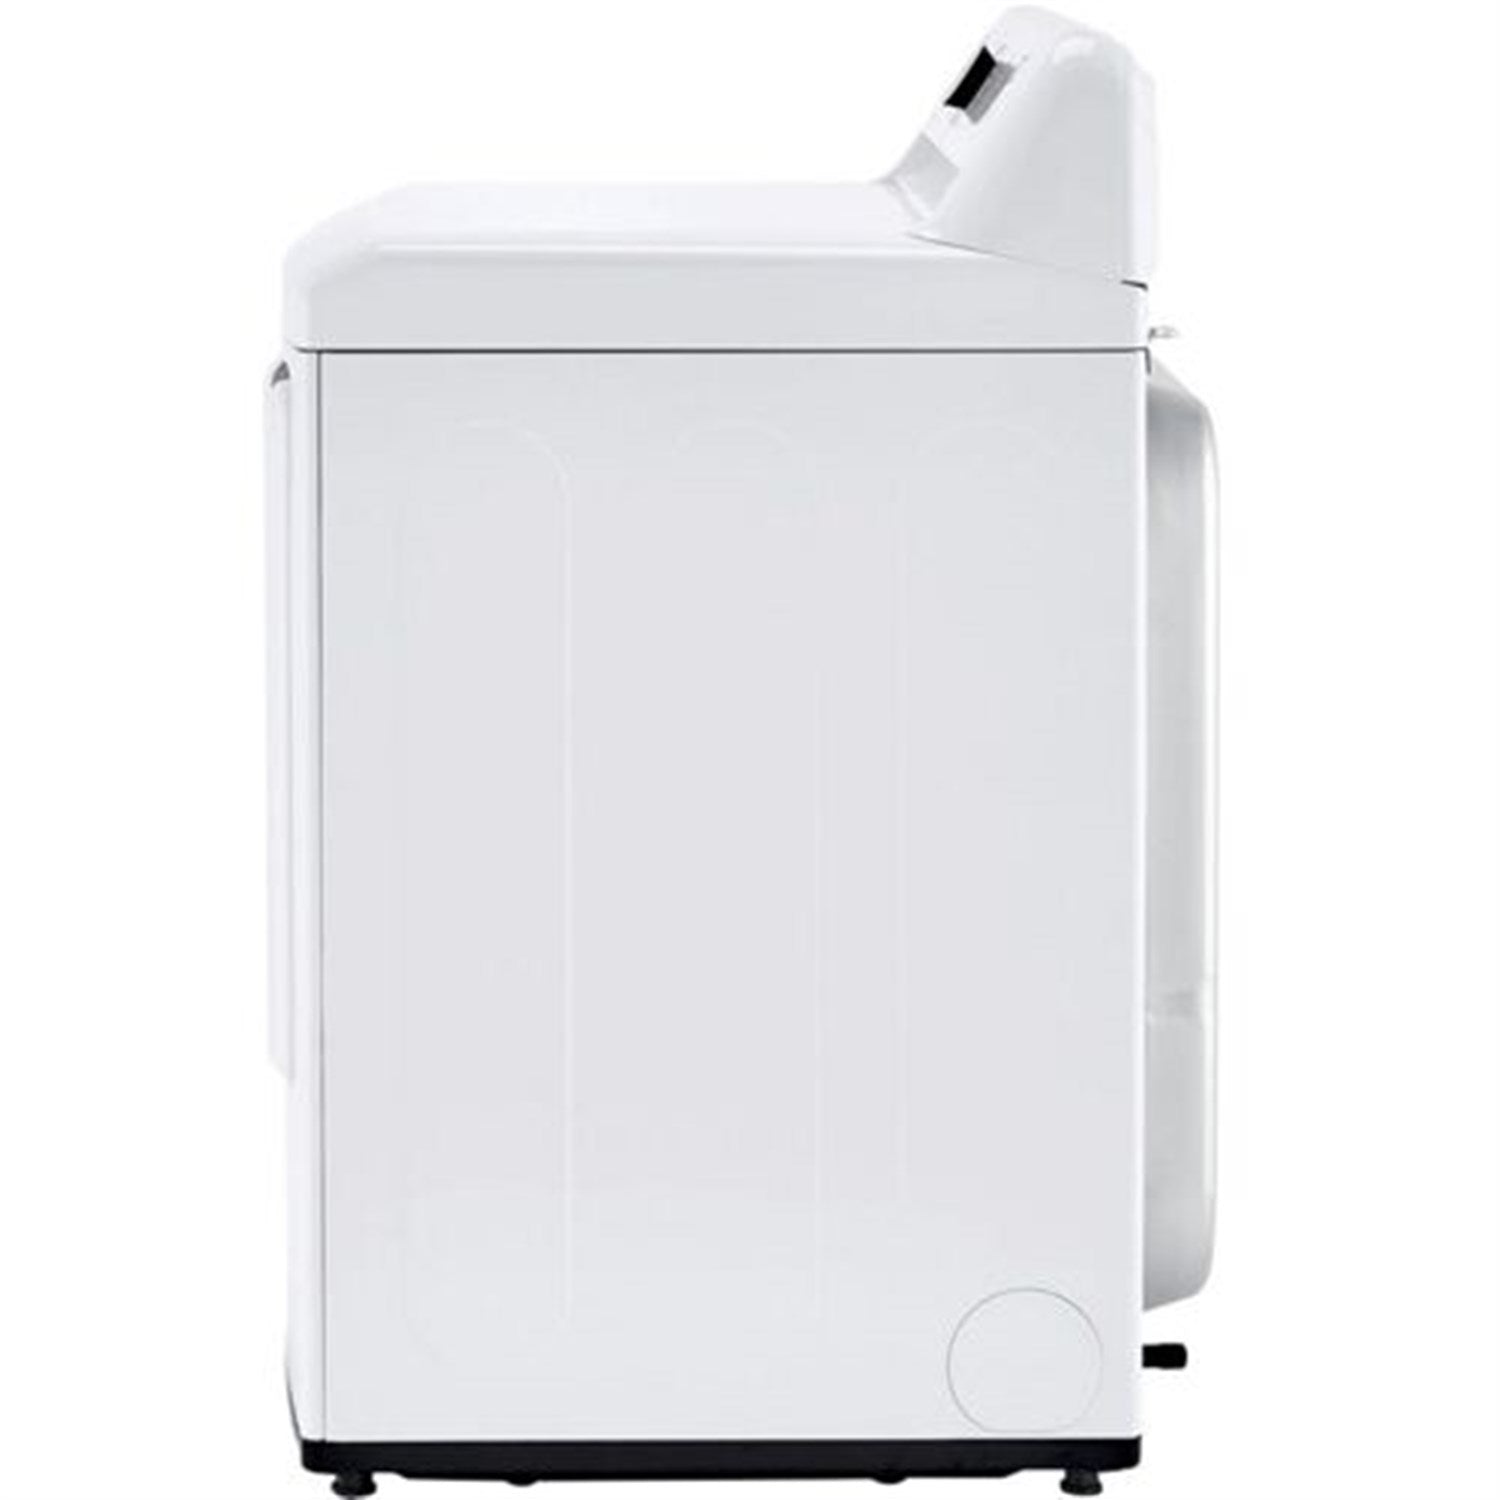 LG - 7.3 cu. ft. Ultra Large High Efficiency White Gas Dryer with Sensor Dry | DLG7001W